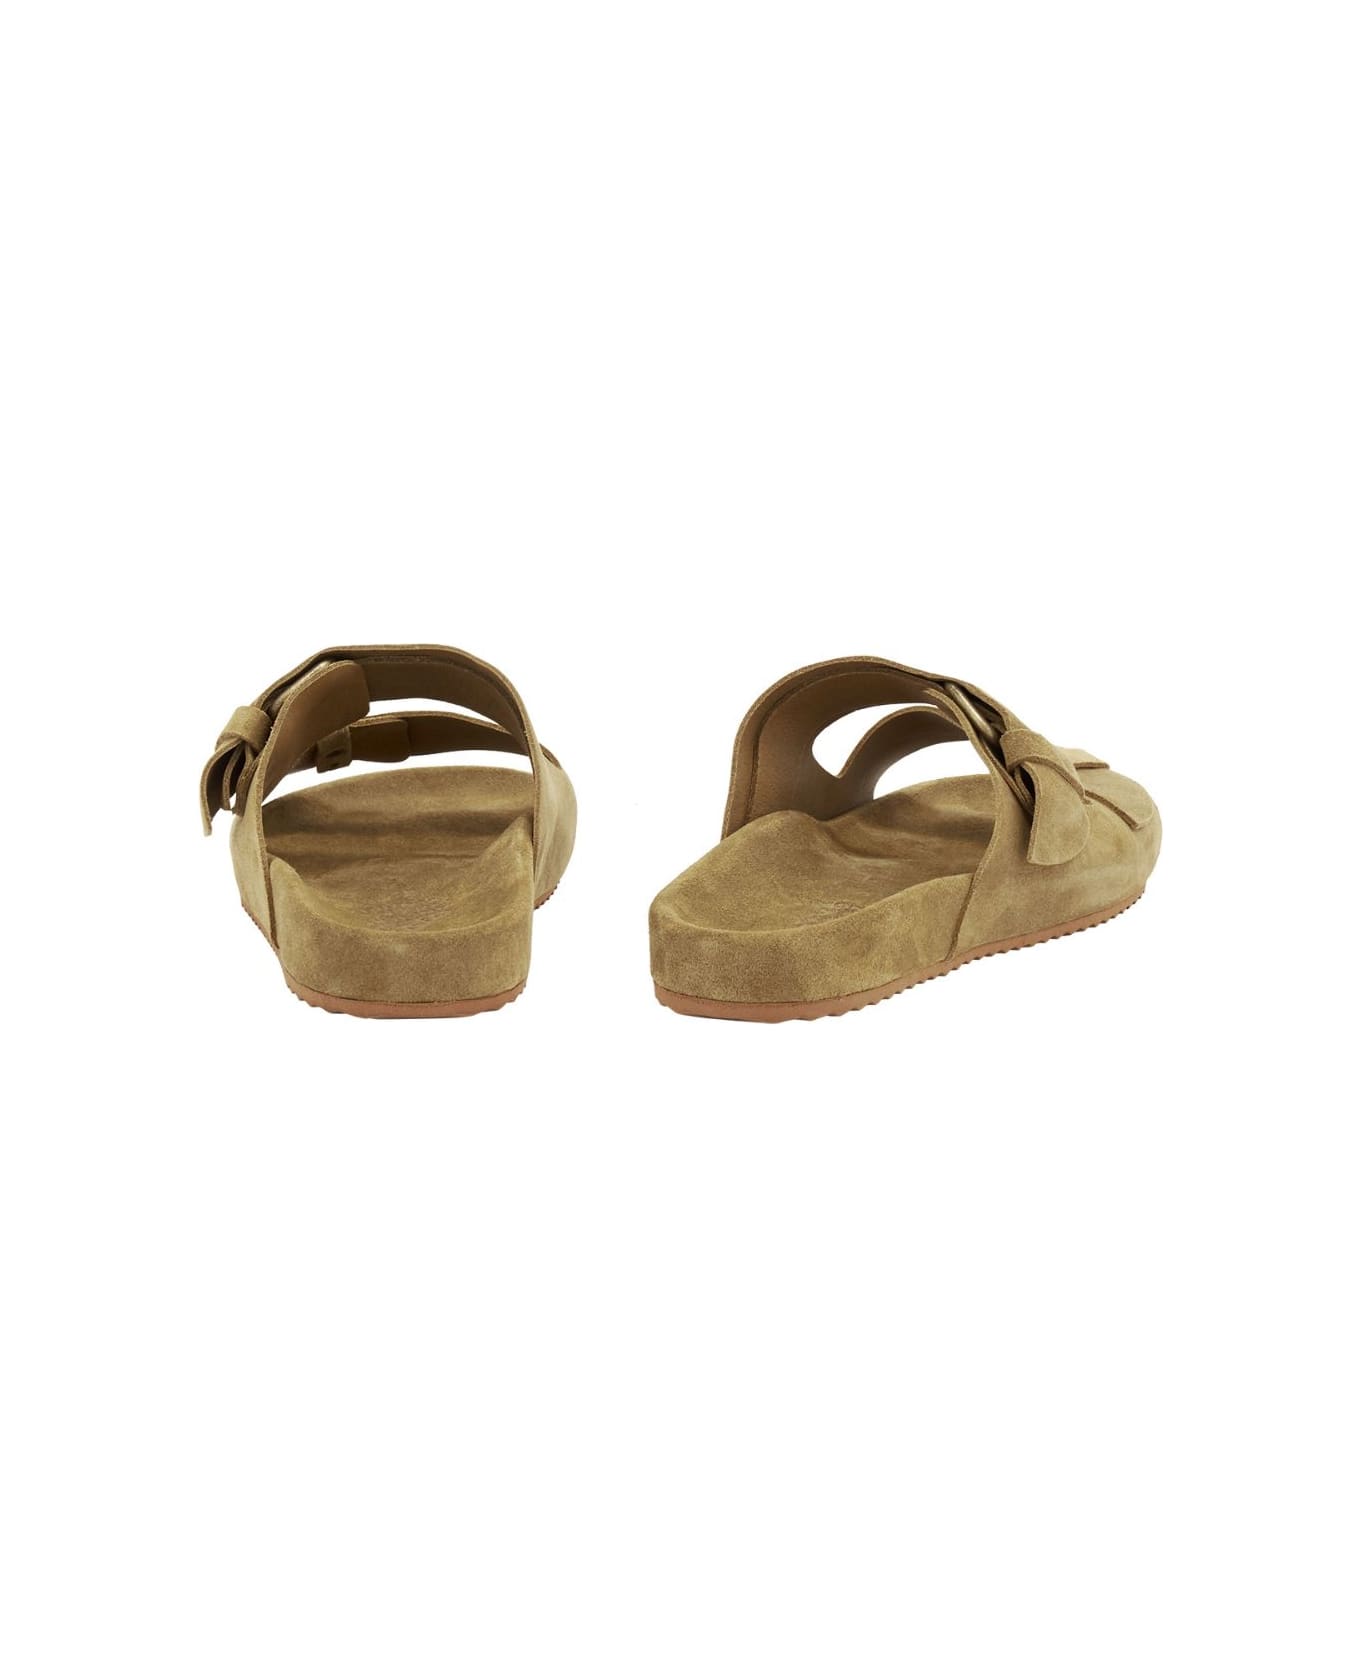 Ancient Greek Sandals Diogenis Sandals - Military